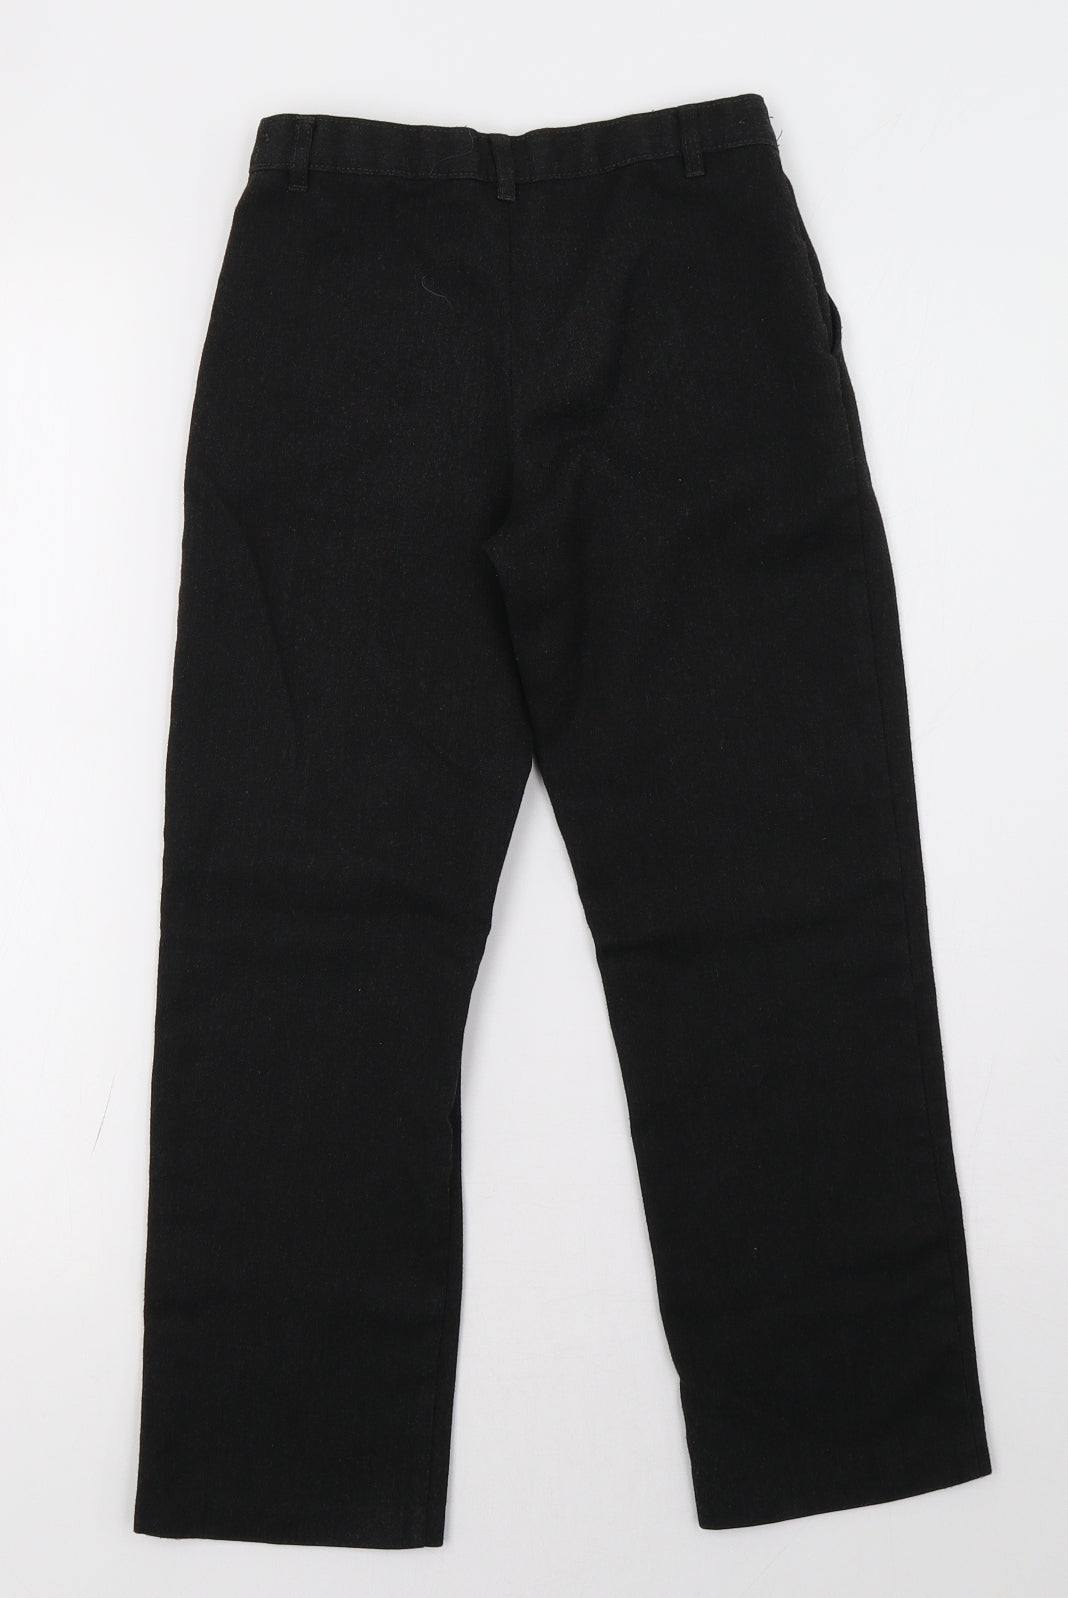 George Boys Grey    Trousers Size 8-9 Years